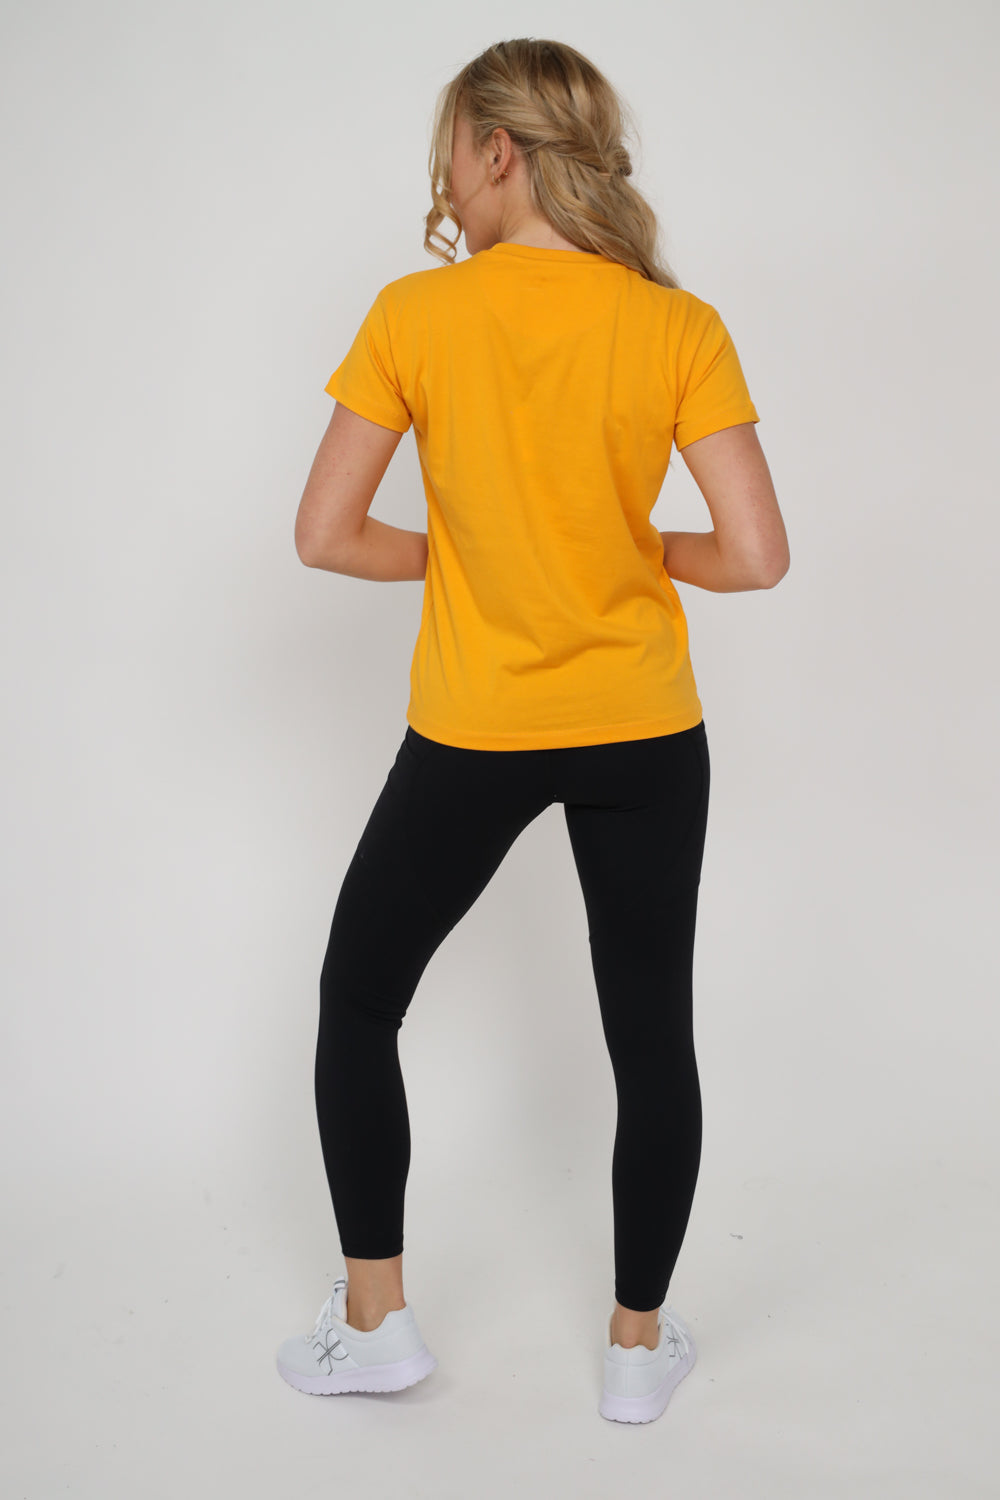 Validate Summer Yellow T-Shirt | Validate Fashion Women's T-Shrits and Vests | Hertfordshire